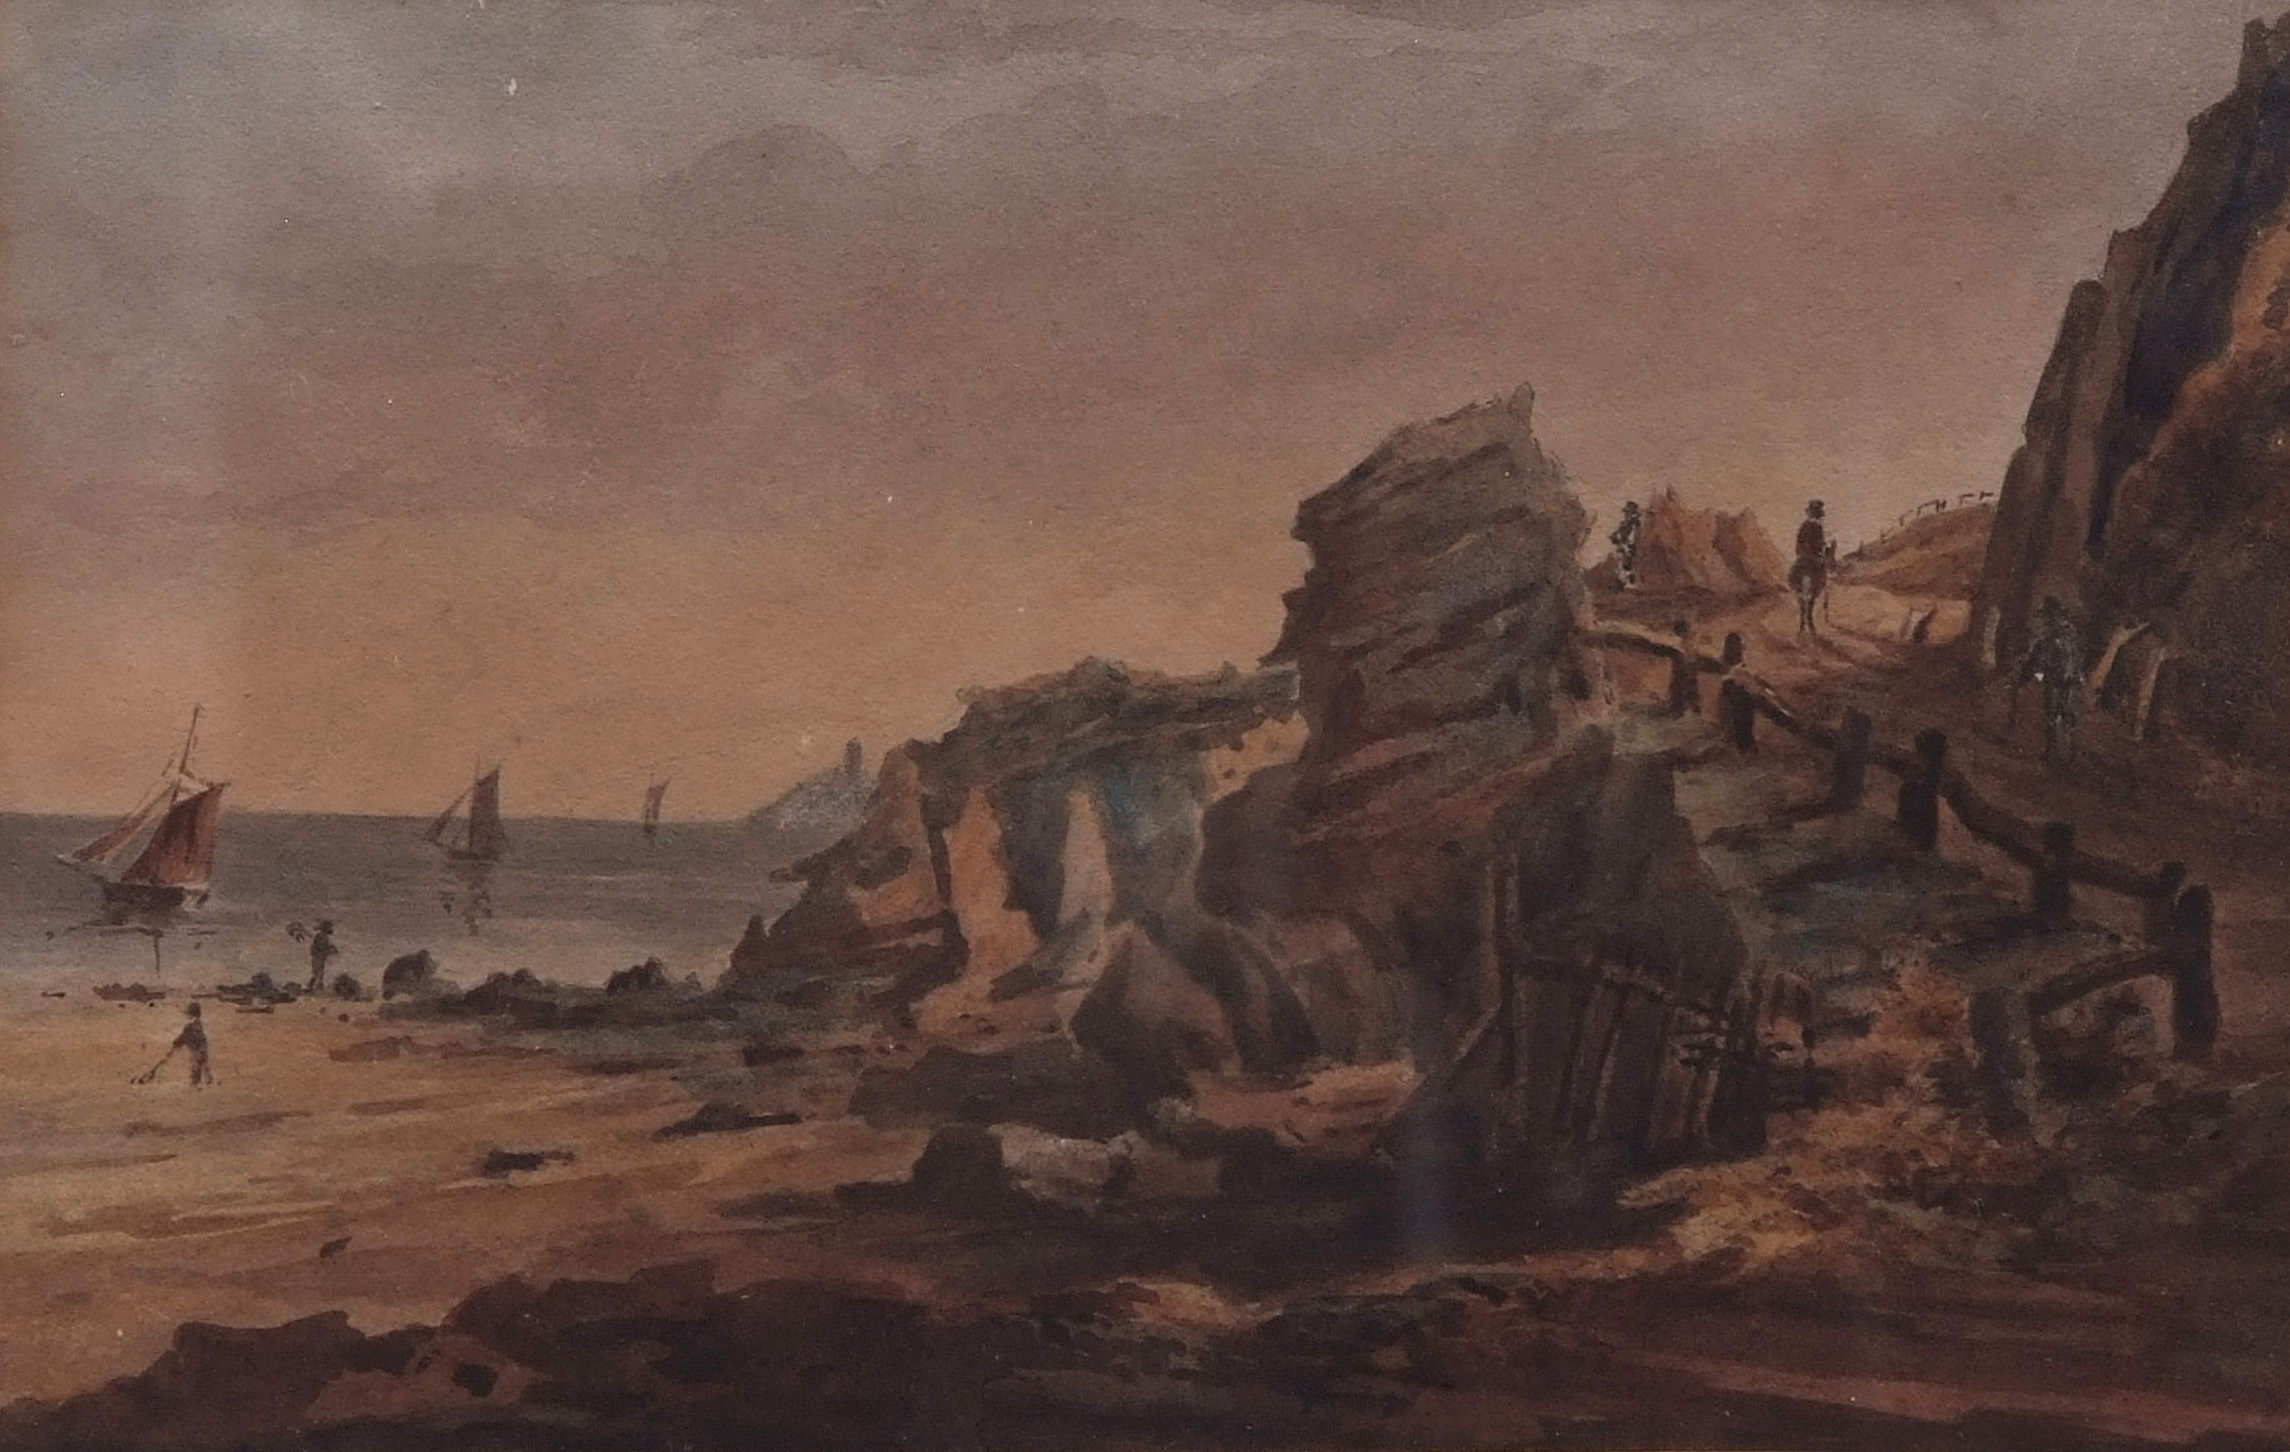 ROBERT DIXON (1780-1815) The road from the beach watercolour 6 x 9 1/2 ins Provenance: Cromer